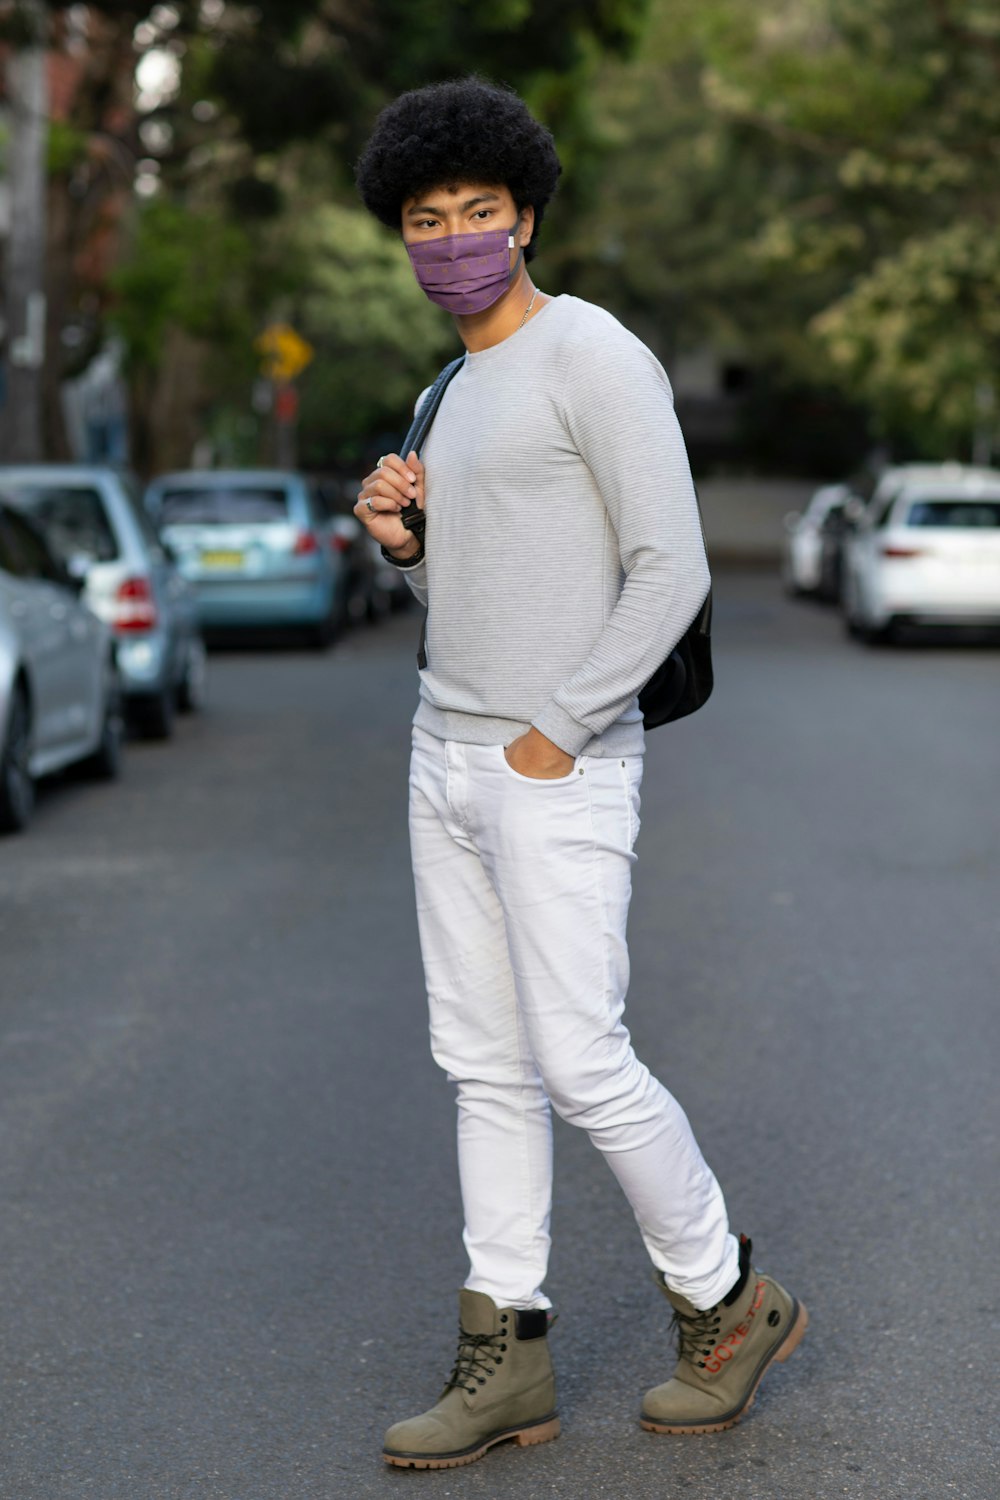 man in white sweater and pants standing on road during daytime